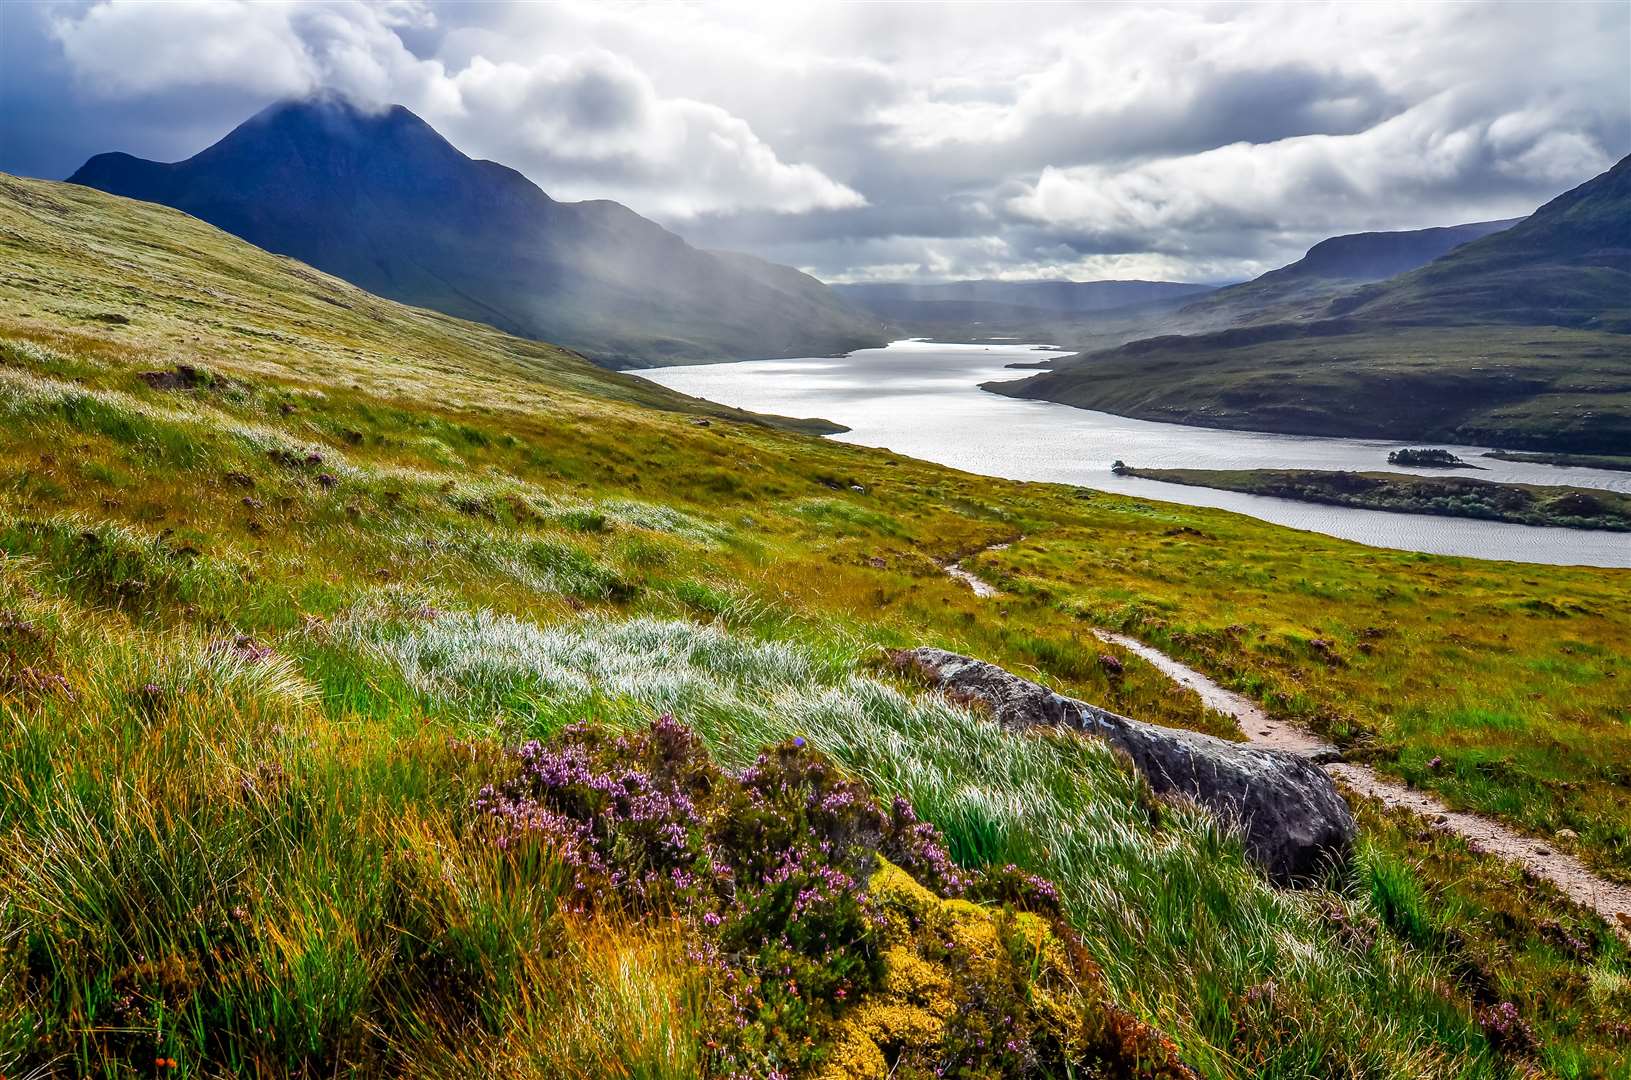 The special environment of the Highlands and Islands is renowned the world over.